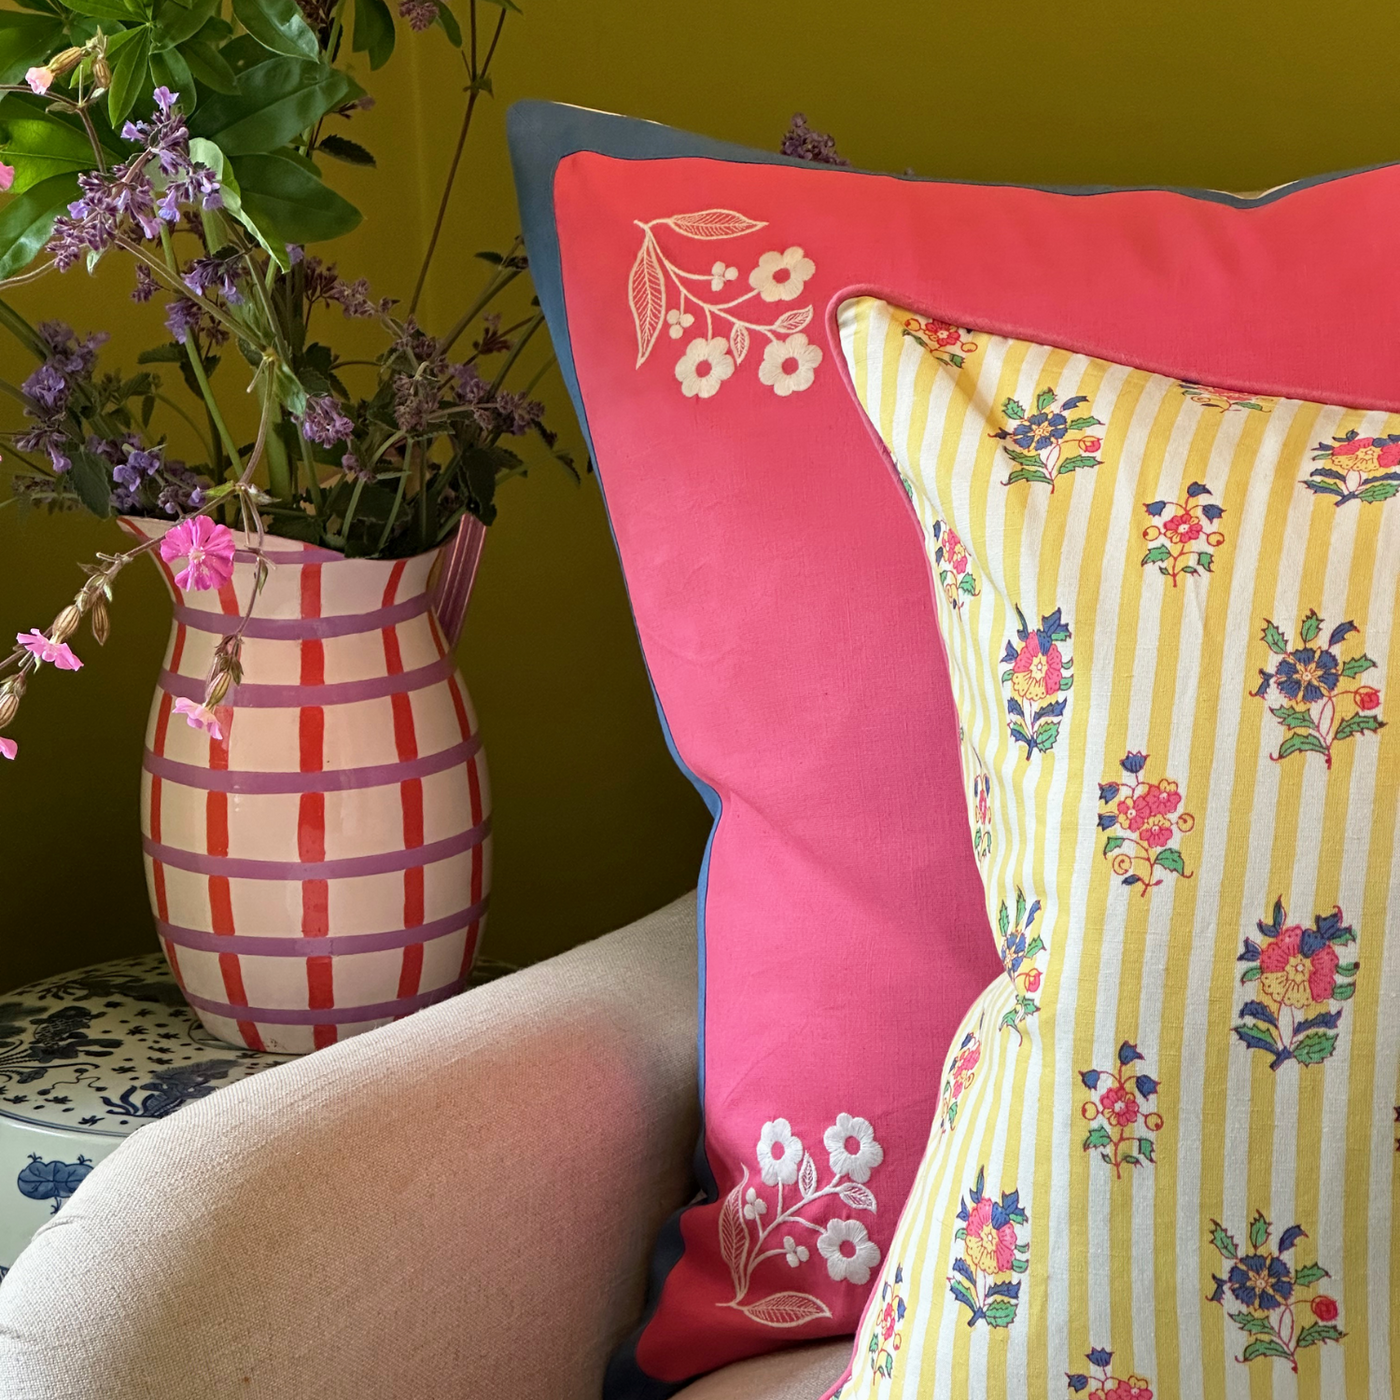 Hester Embroidered Floral Cushion - Pink & Blue